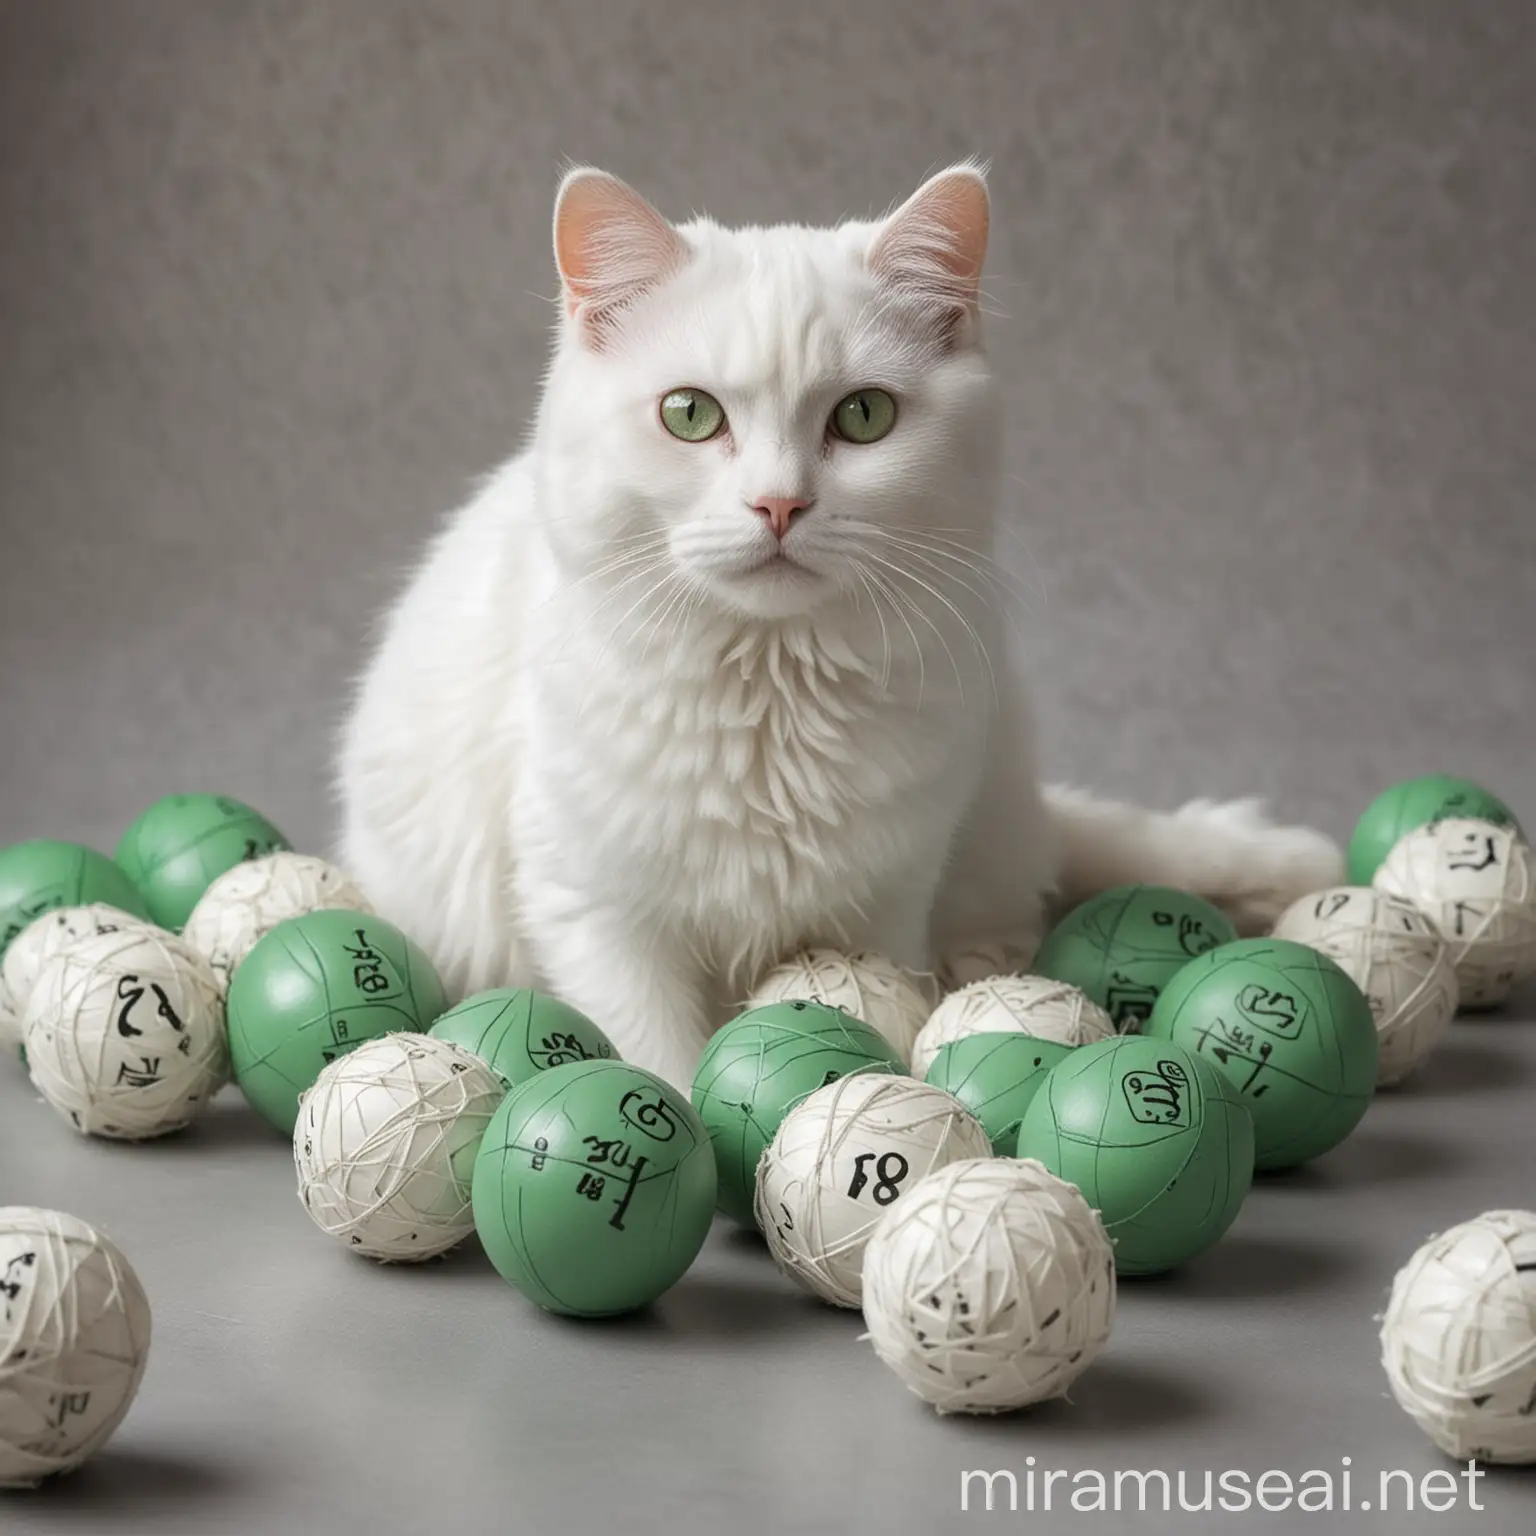 White Cat Sitting Next to a Bundle of Nine Balls in Green and Silver Tones